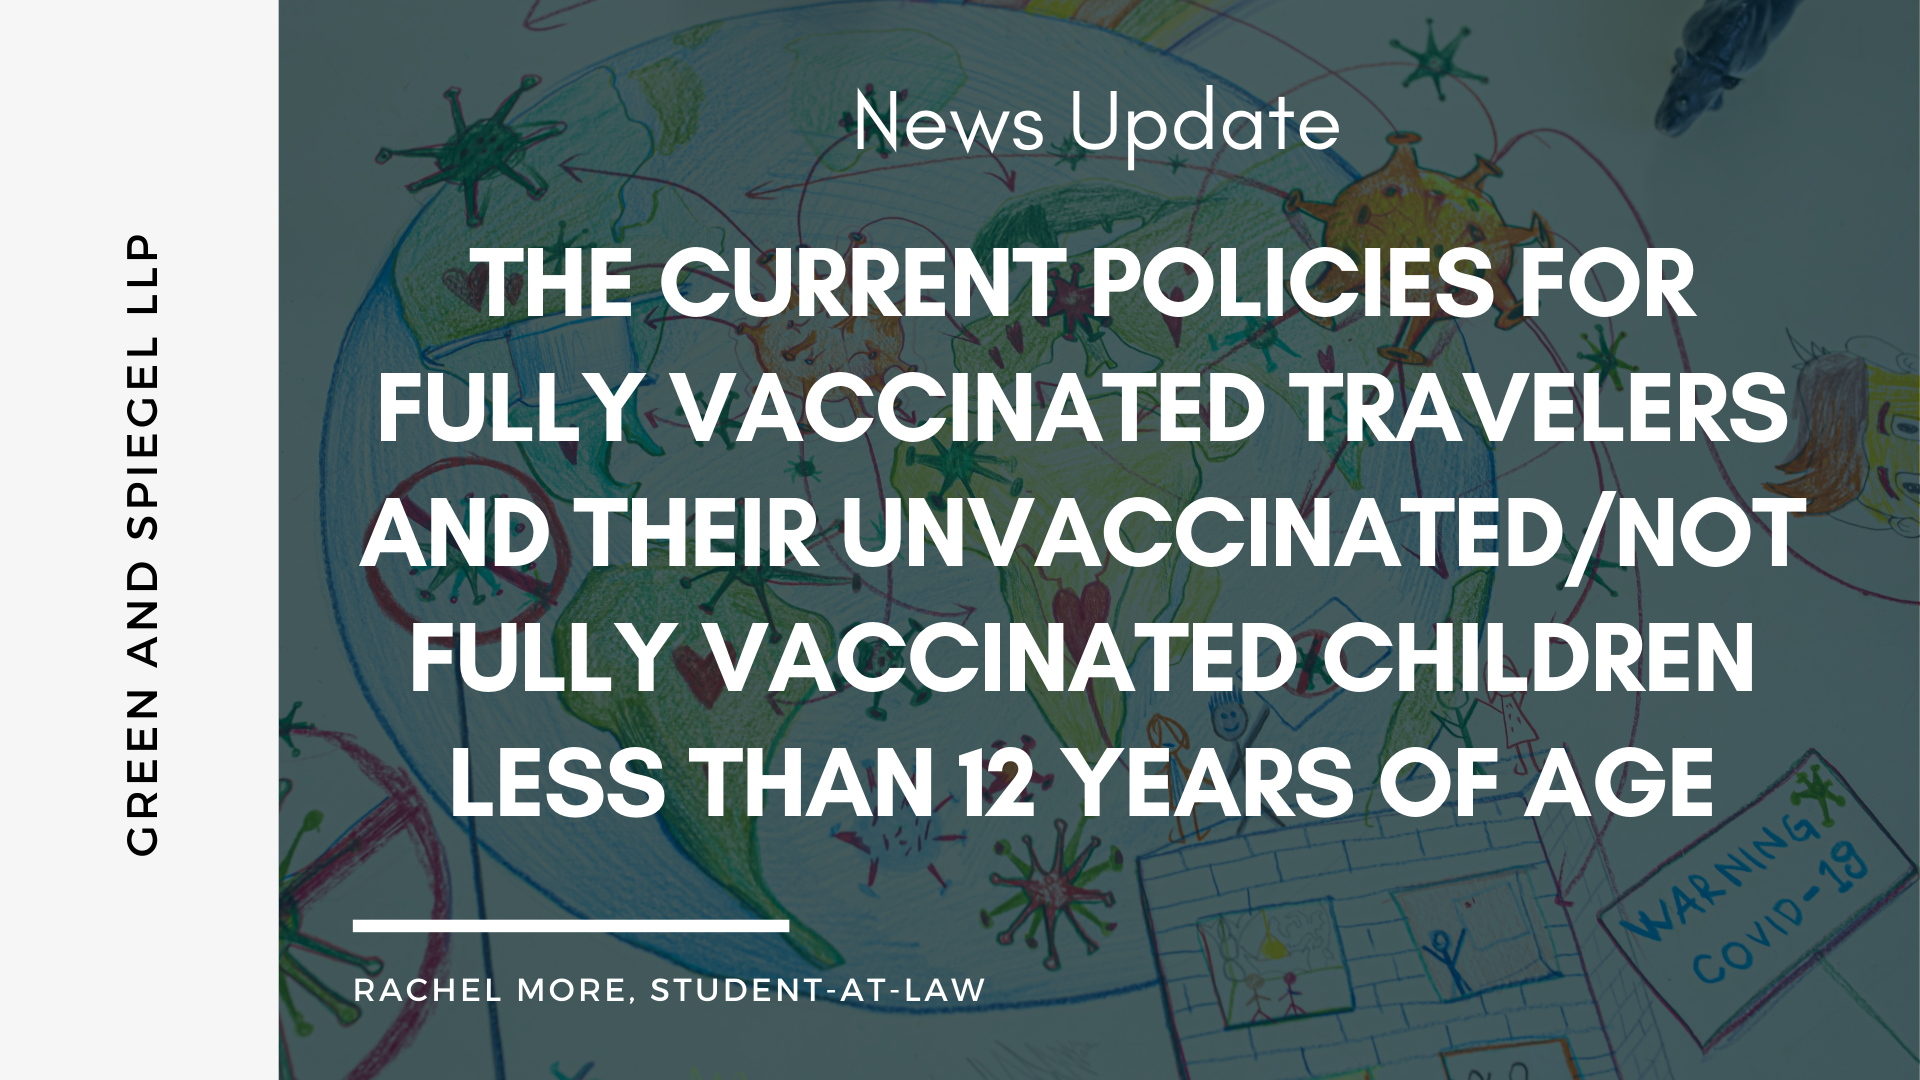 THE CURRENT POLICIES FOR FULLY VACCINATED TRAVELERS AND THEIR UNVACCINATED/NOT FULLY VACCINATED CHILDREN LESS THAN 12 YEARS OF AGE